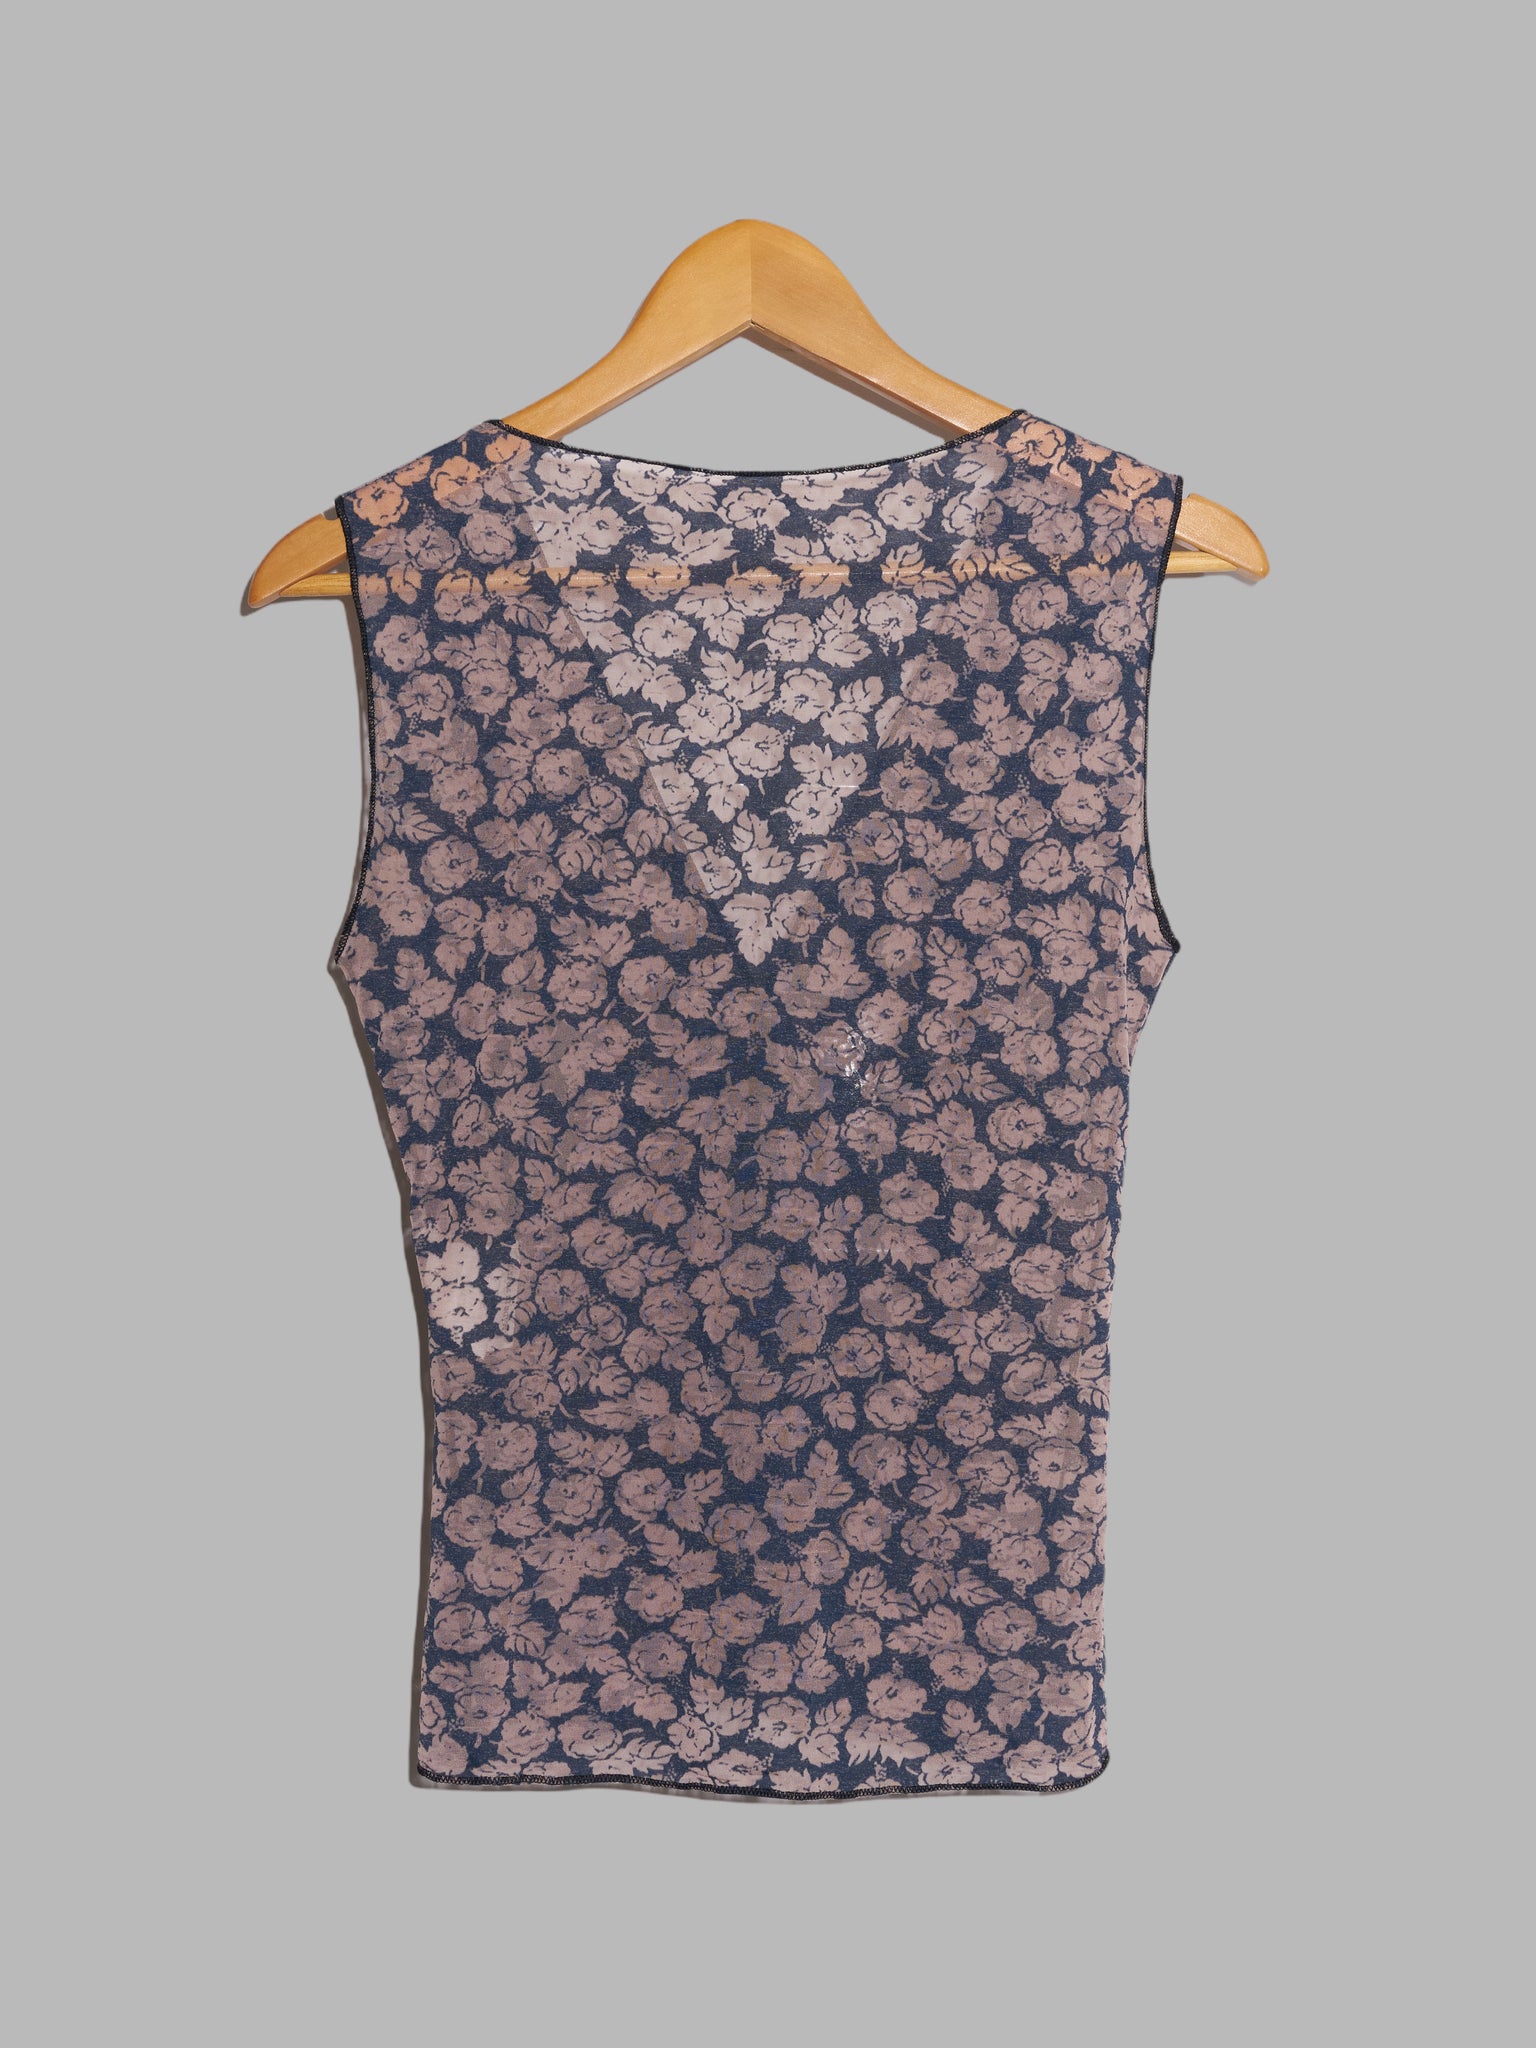 Jean Colonna sheer grey-brown floral print jersey v-neck sleeveless top